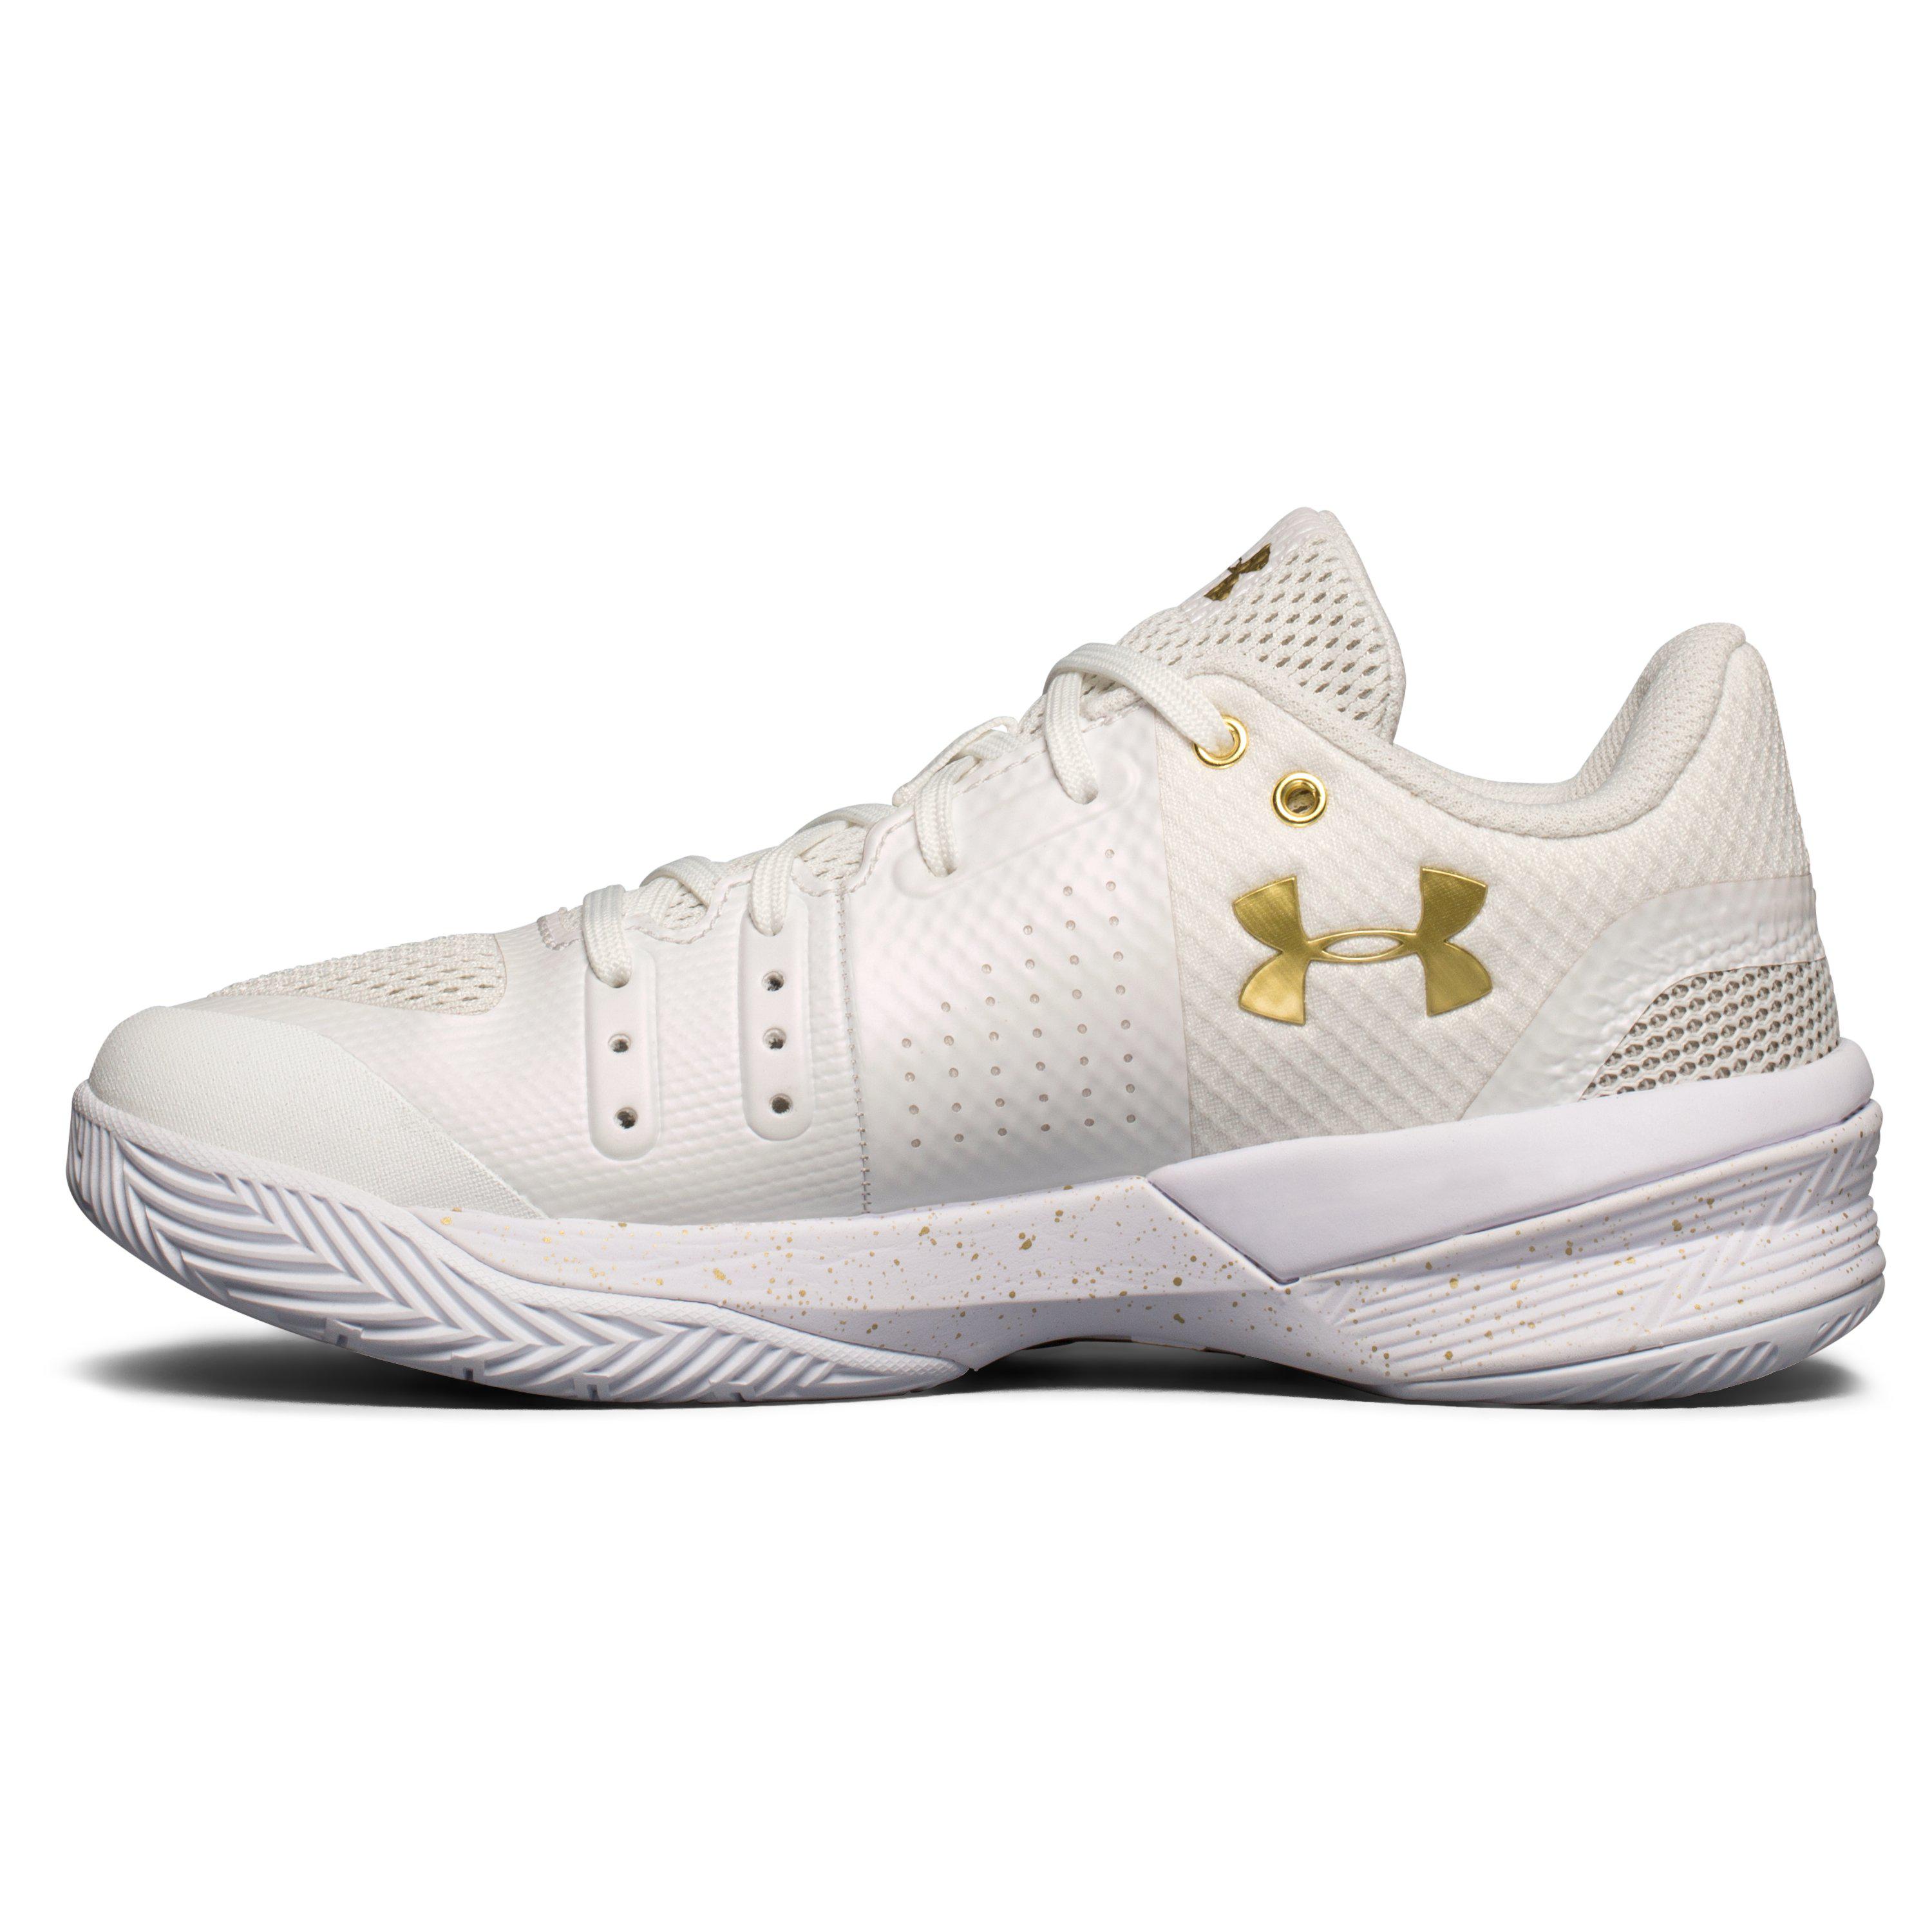 Under Armour Women's Ua Block City Volleyball Shoes Lyst